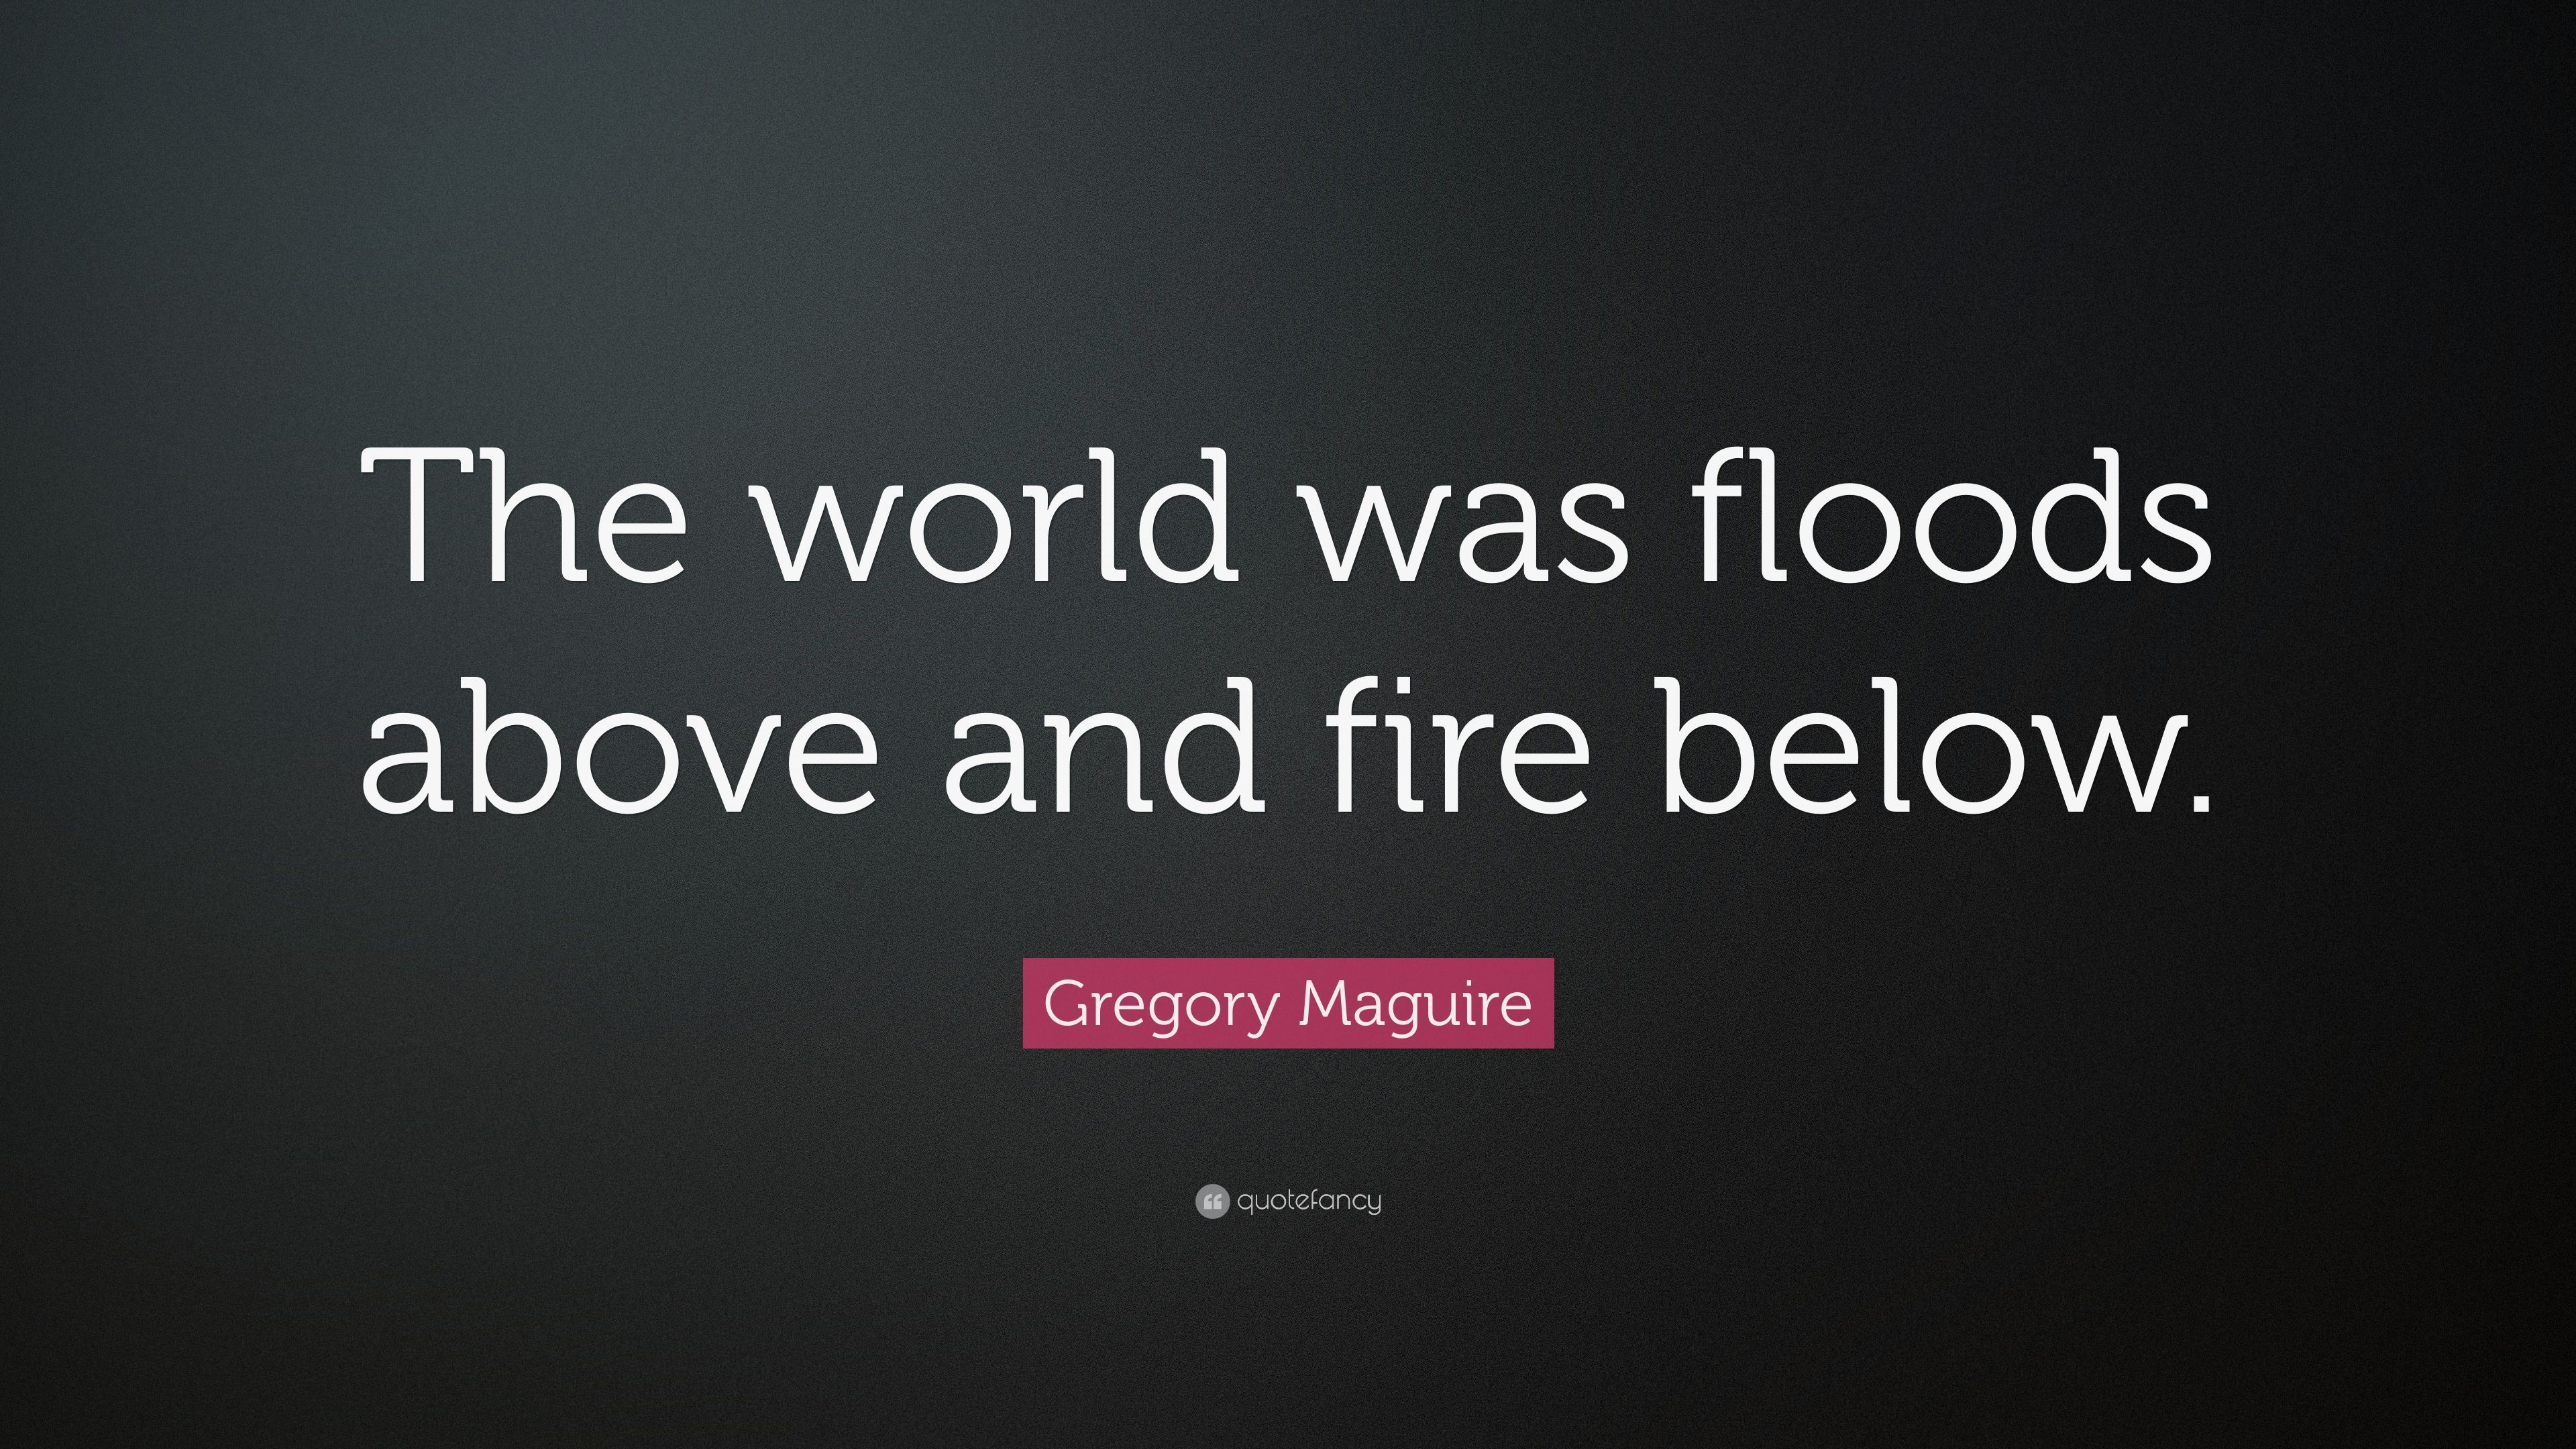 Gregory Maguire Quote: “The world was floods above and fire below